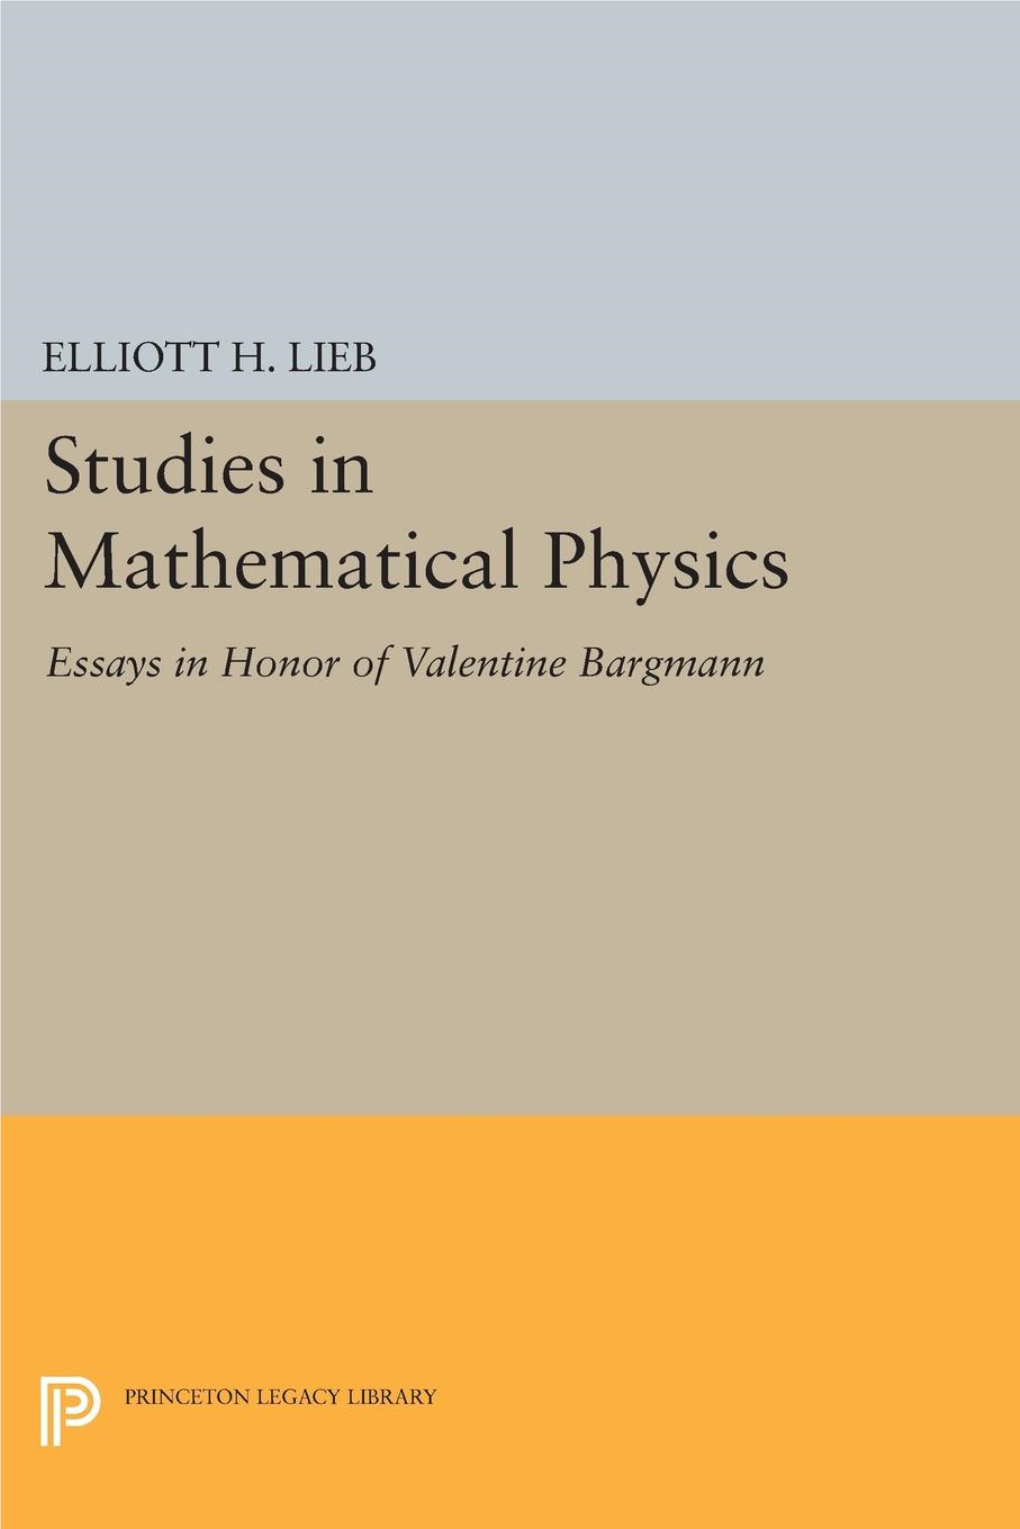 Studies in Mathematical Physics Essays in Honor of Valentine Bargmann Edited by E